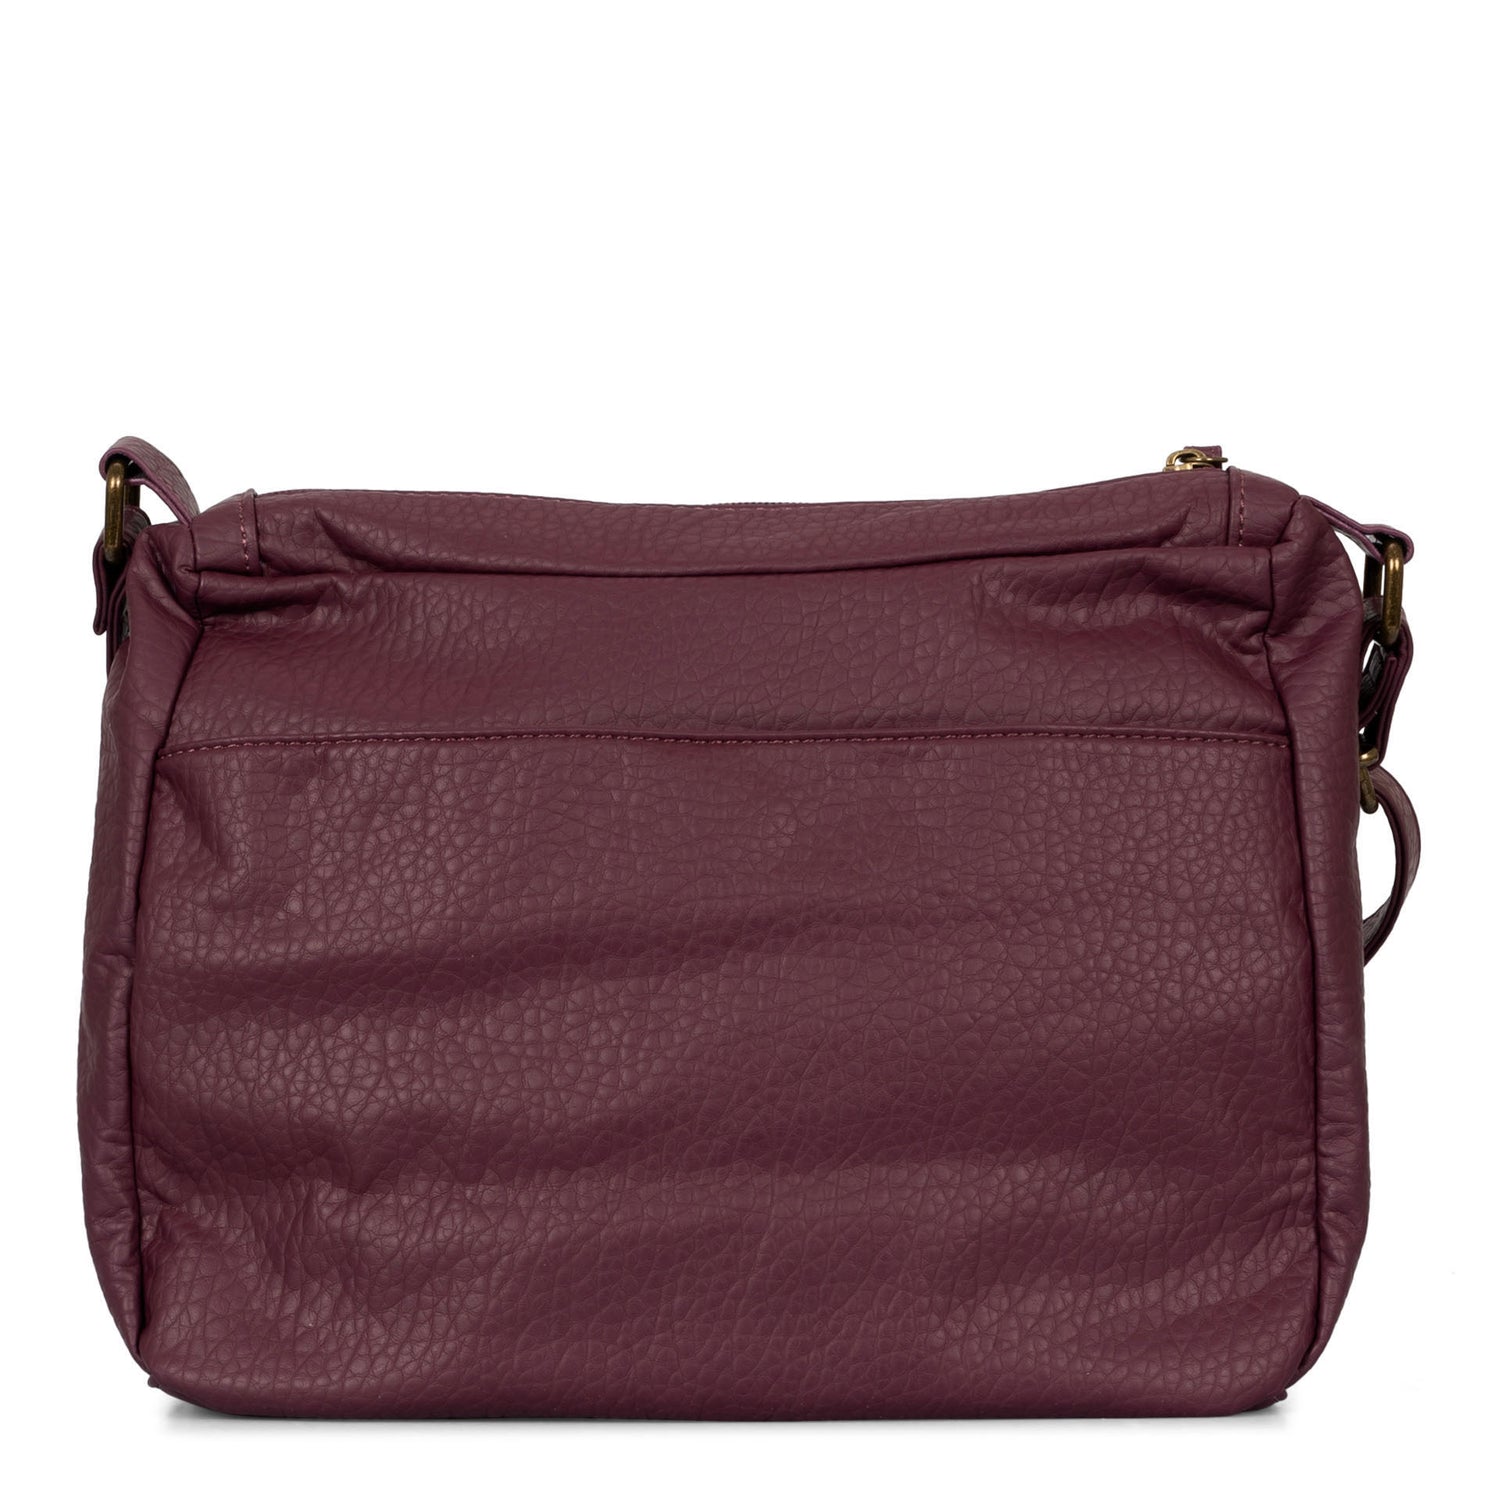 Backside of a women's burgundy crossbody bag called Pebbled from the brand Cargo on a white background.